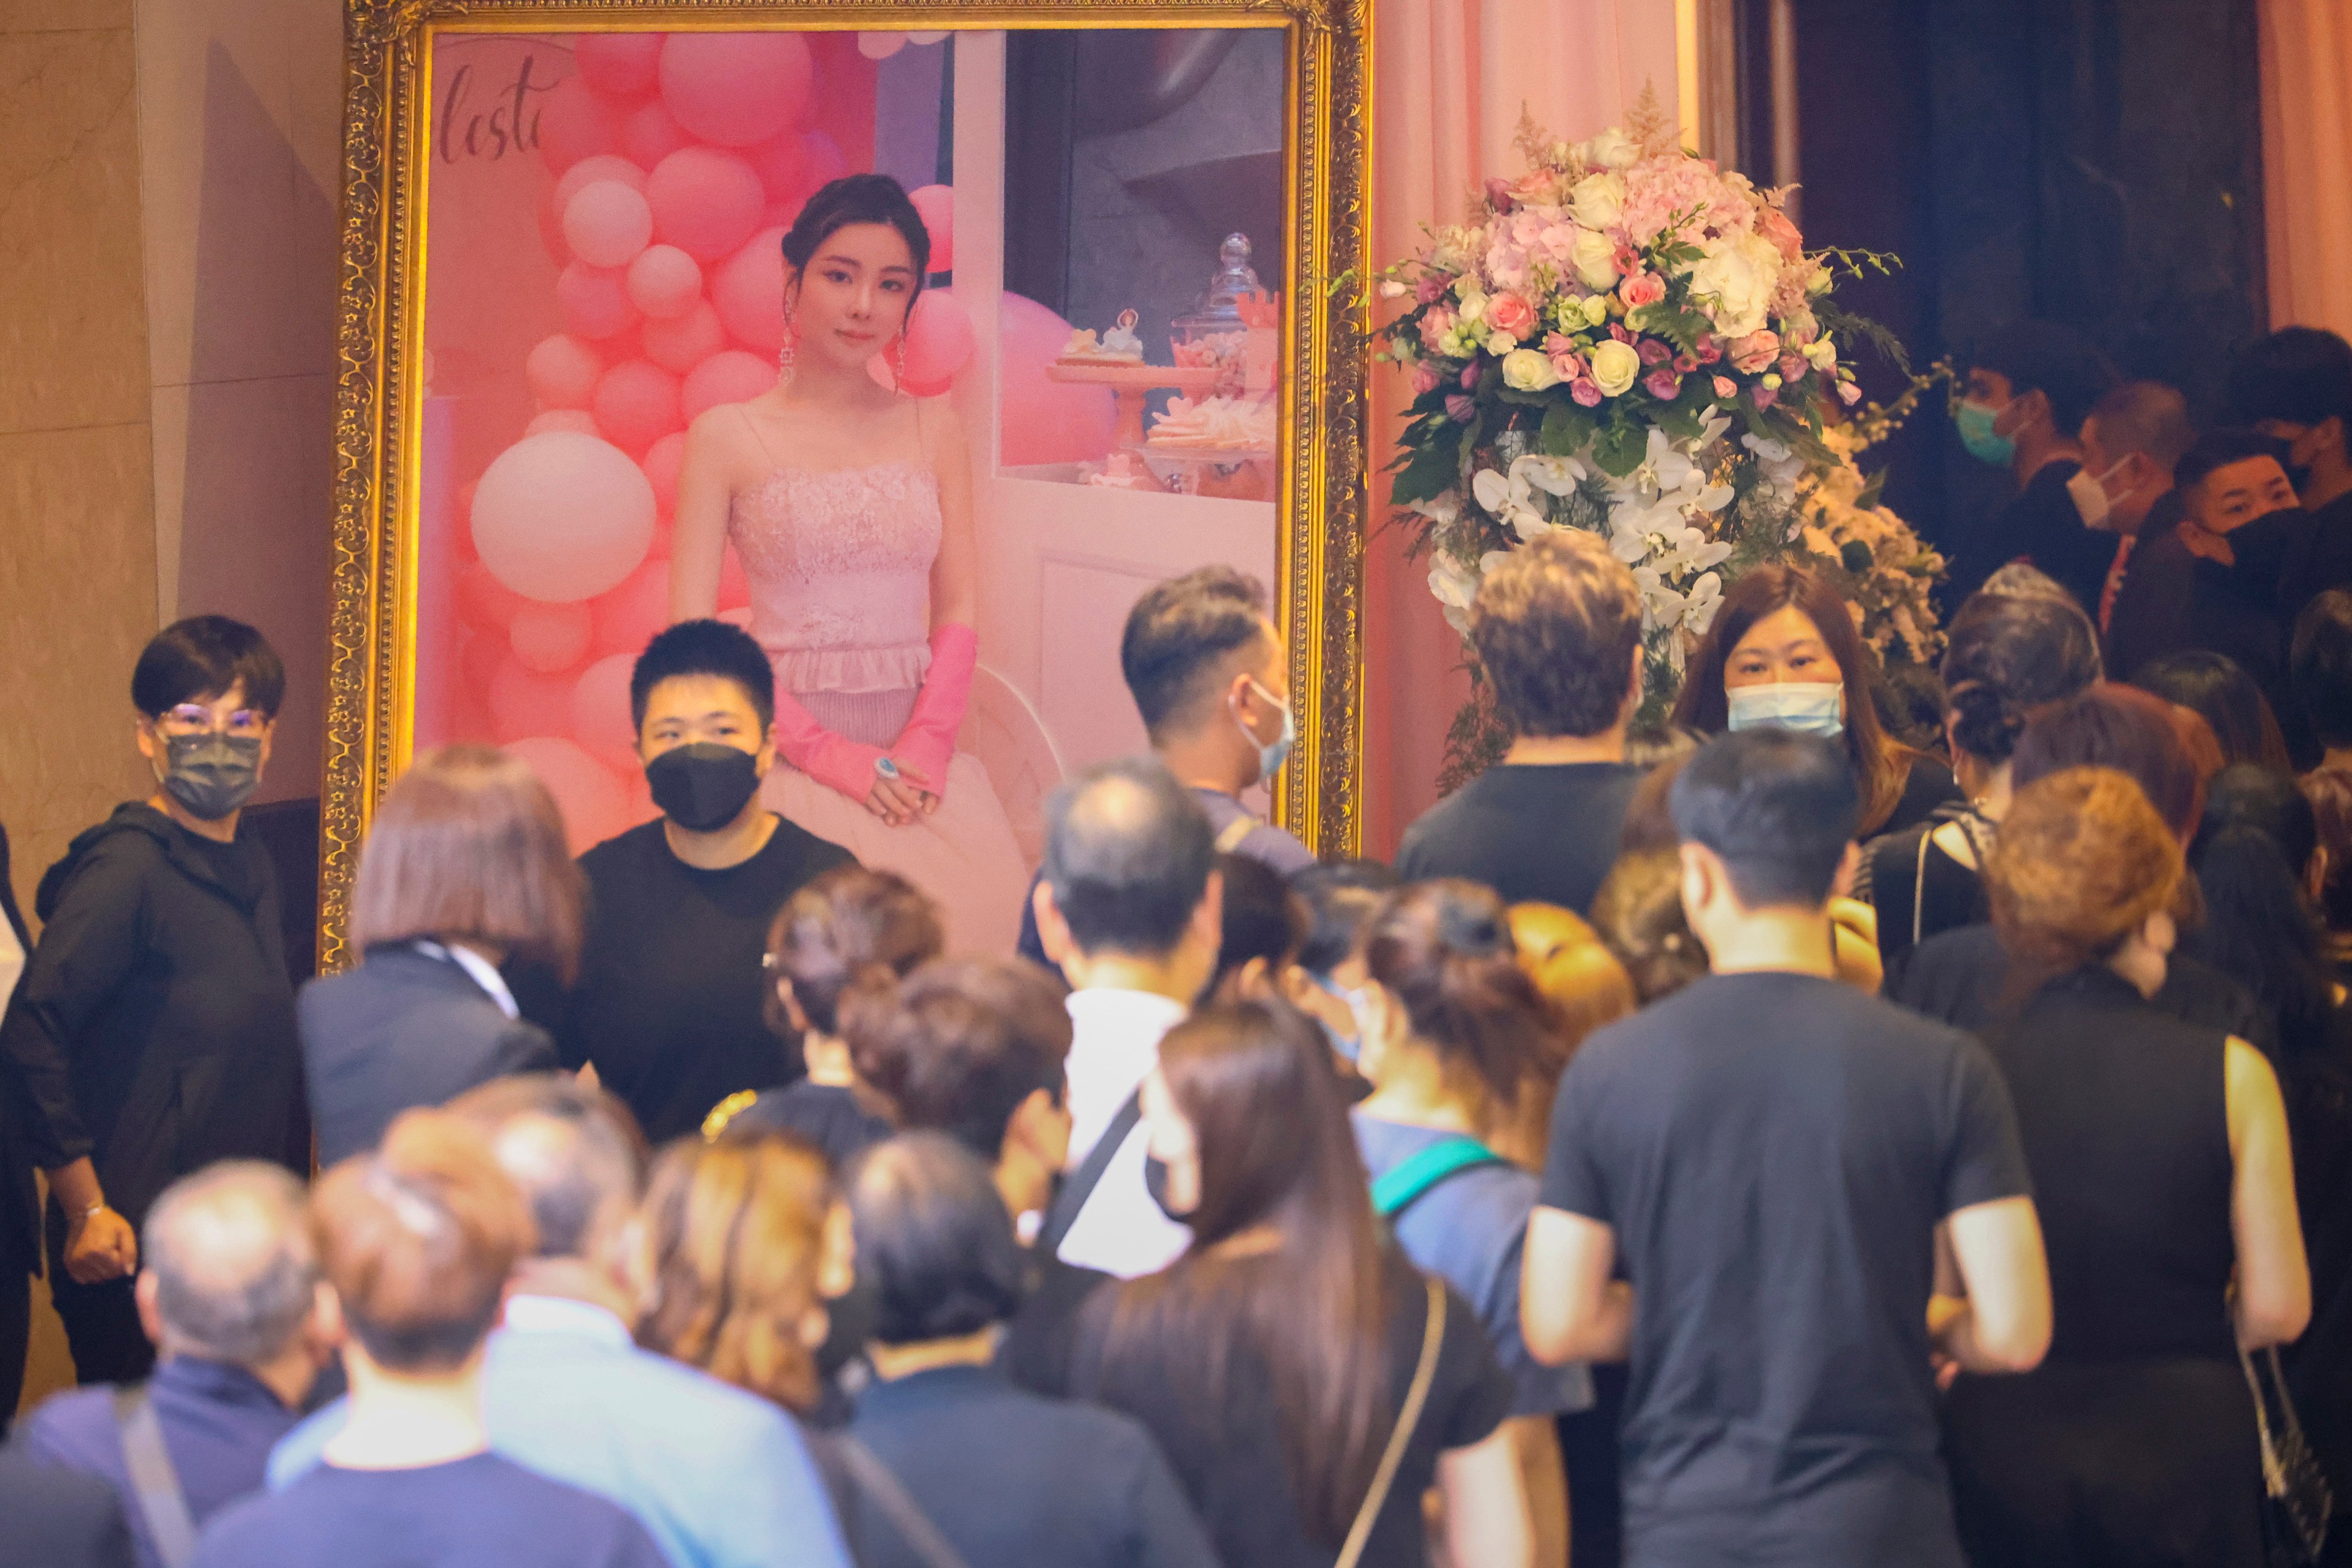 Large portraits of Abby Choi were placed inside and at the entrance of the funeral home. Photo: Dickson Lee